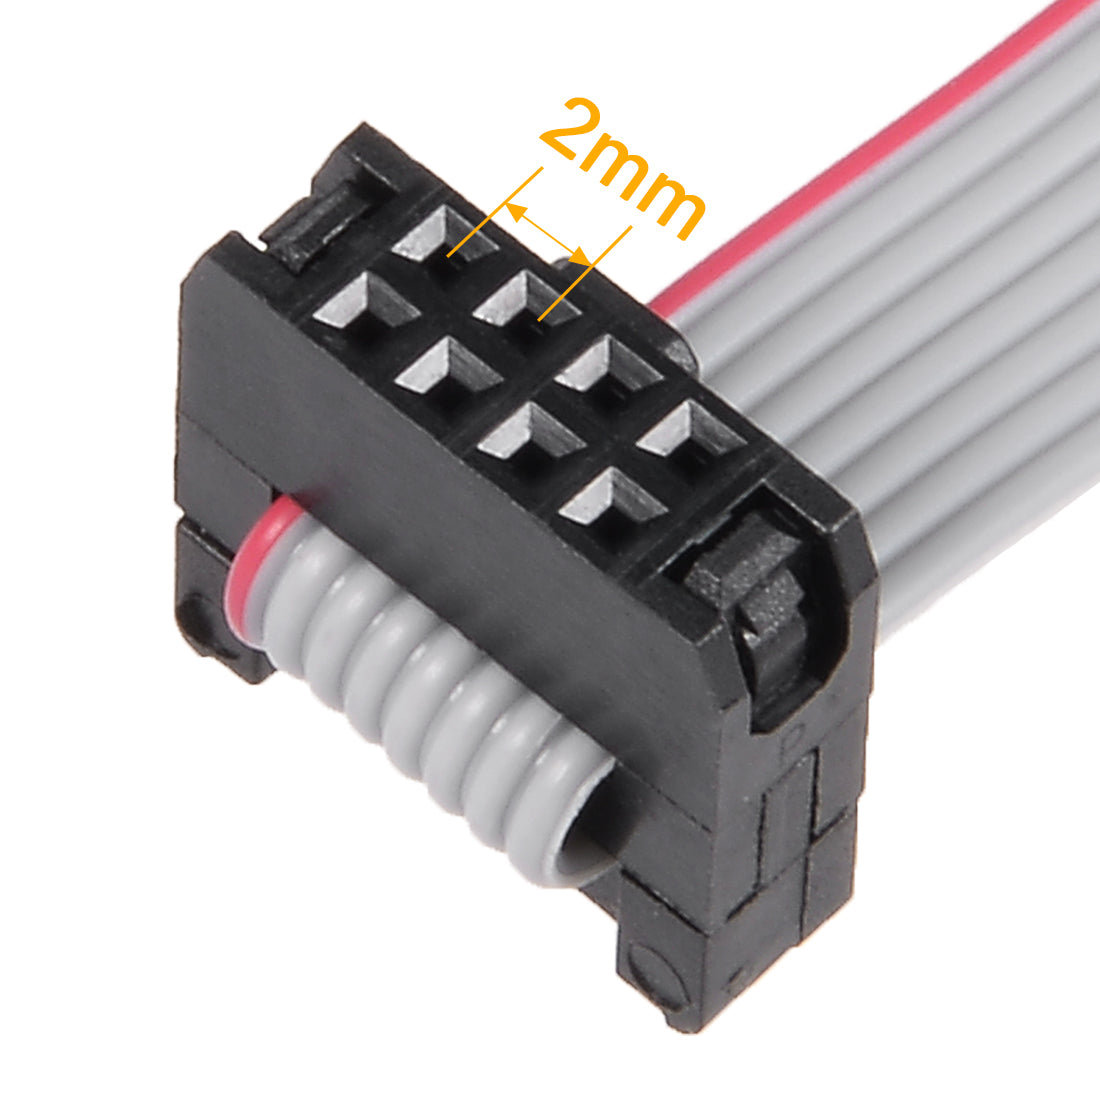 uxcell Uxcell IDC 8 Pins Connector Flat Ribbon Cable Female Connector Length 30cm 2mm Pitch,5pcs